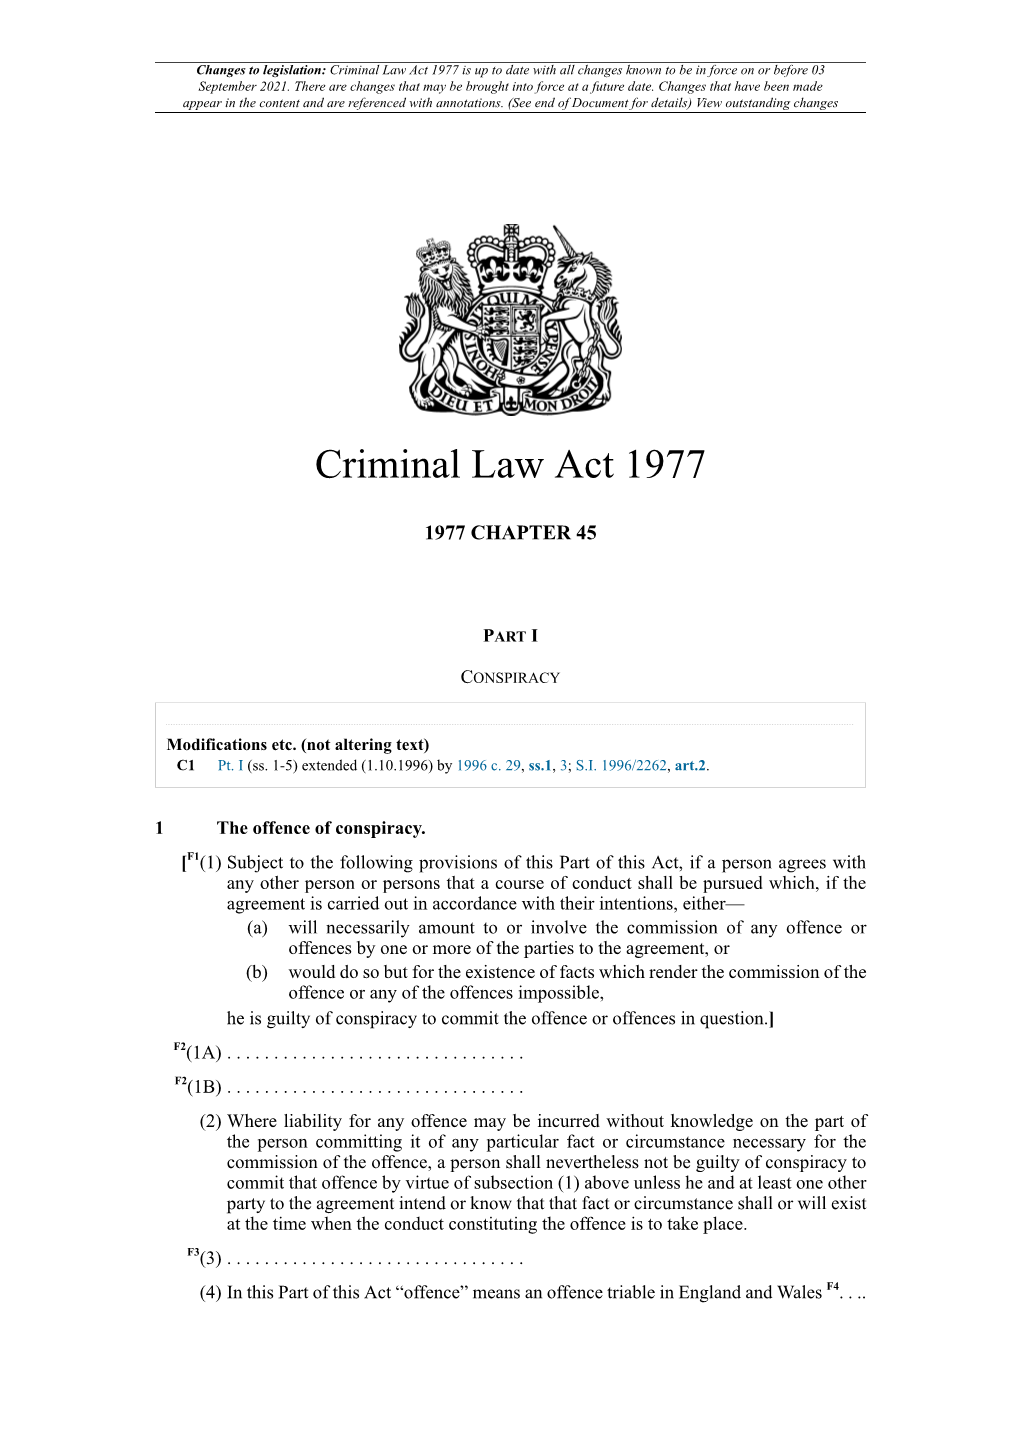 Criminal Law Act 1977 Is up to Date with All Changes Known to Be in Force on Or Before 03 September 2021